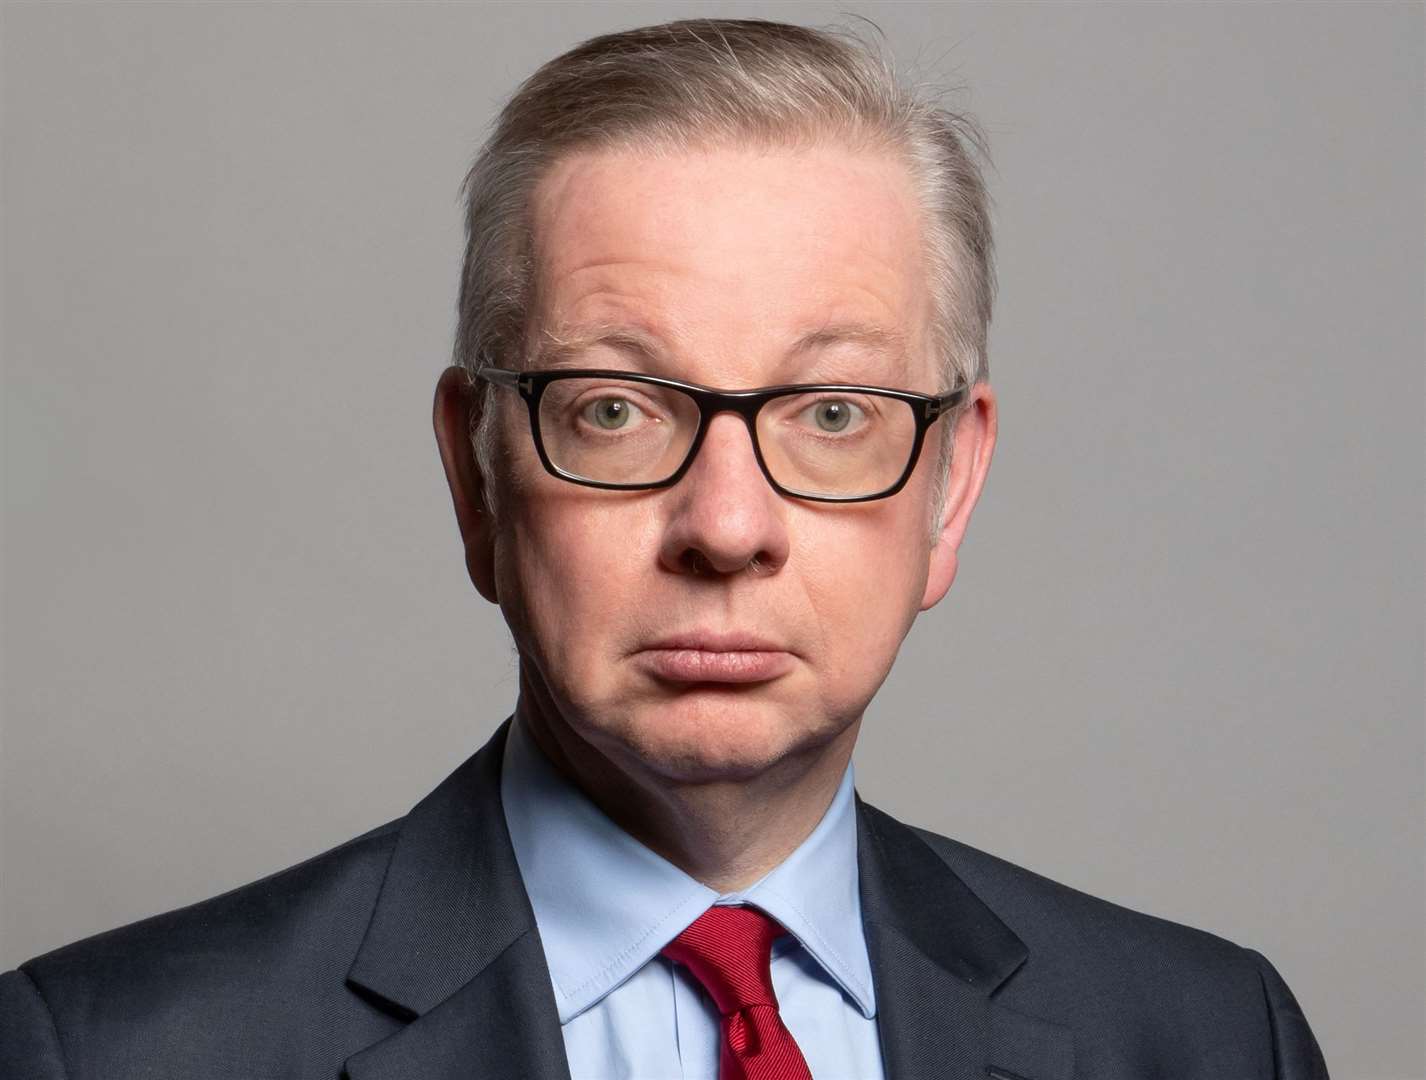 MP Michael Gove, Secretary of State for Levelling Up, Housing and Communities.